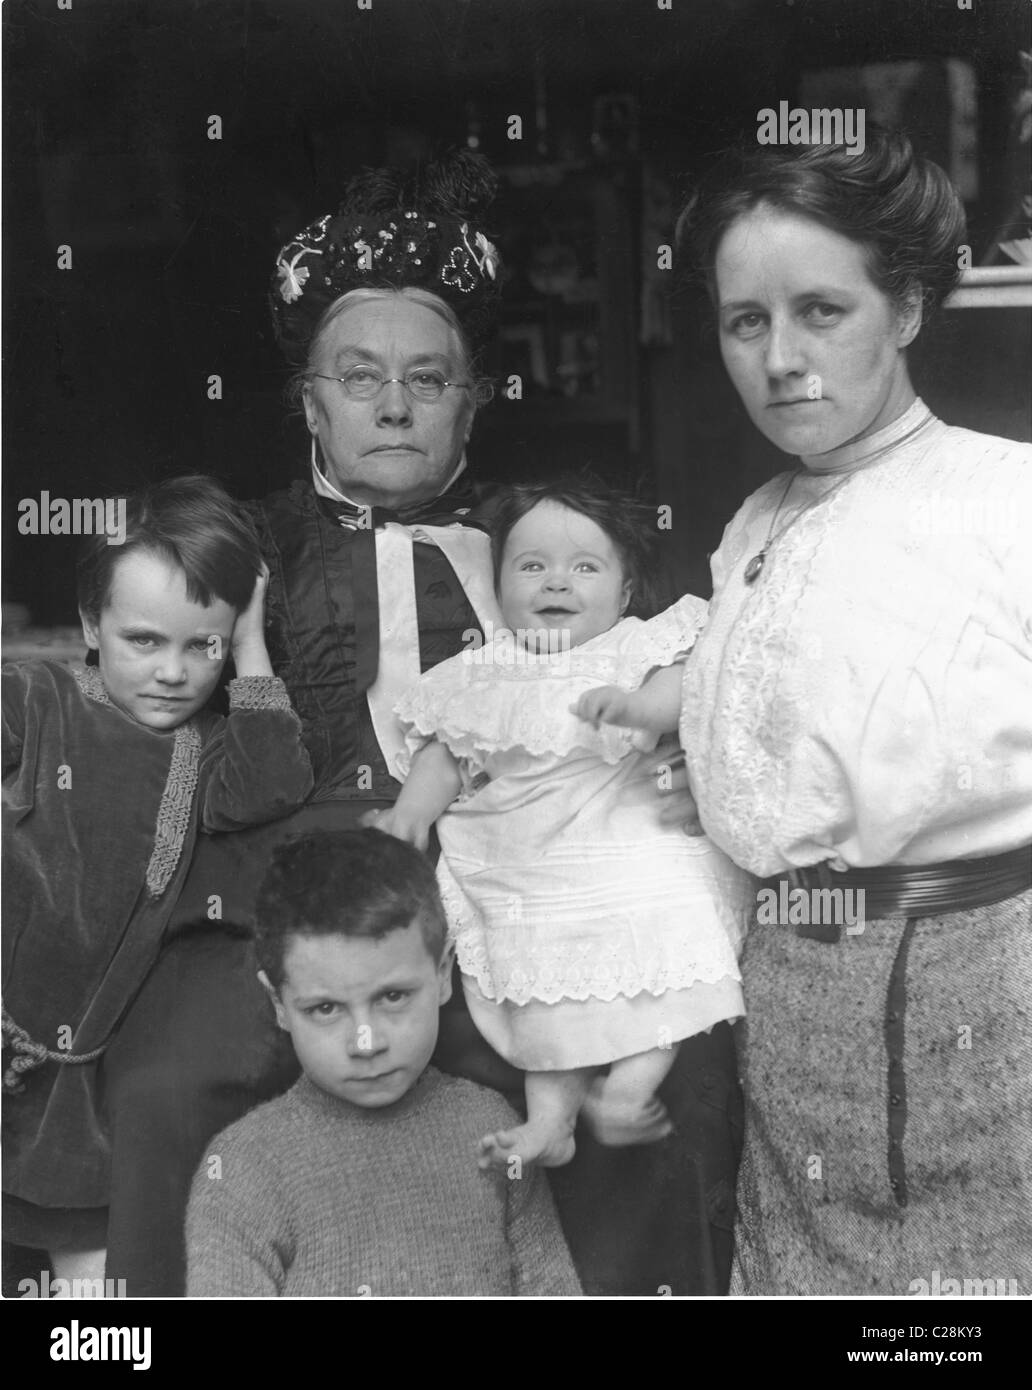 Original Edwardian era glass negative portrait of a respectable Edwardian family. The older woman is a very stern matriarch still dressed in Victorian style clothing with her daughter or daughter in law and her family in the doorway of their home, U.K. circa 1912 Stock Photo